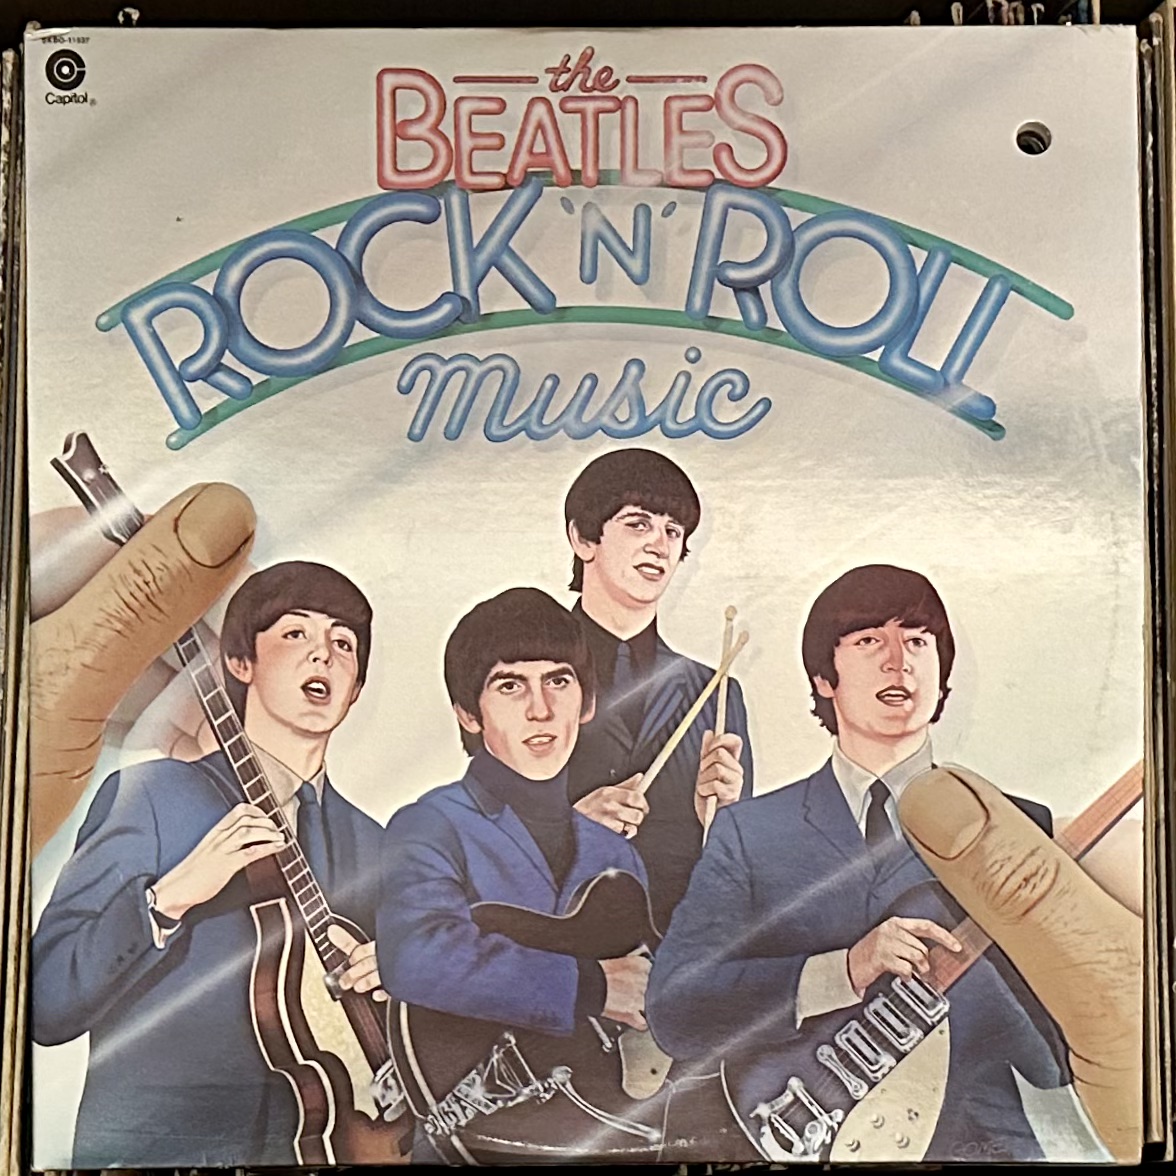 Rock 'n' Roll Music by the Beatles